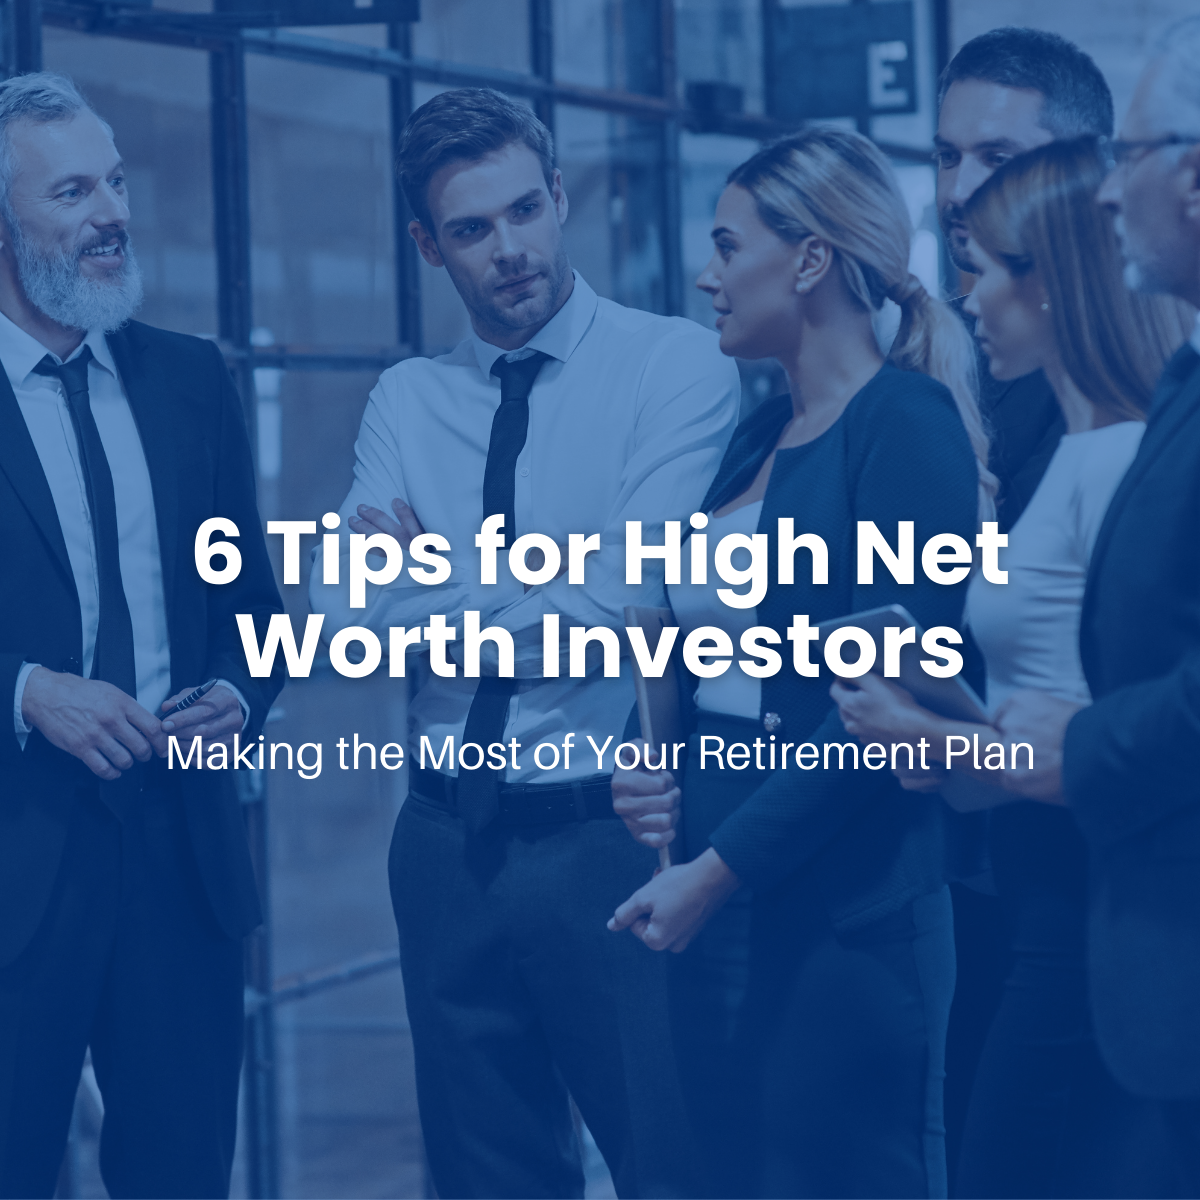 High-Net-Worth Retirement Planning: 6 Ideas to Help You Get Your Finances in Order